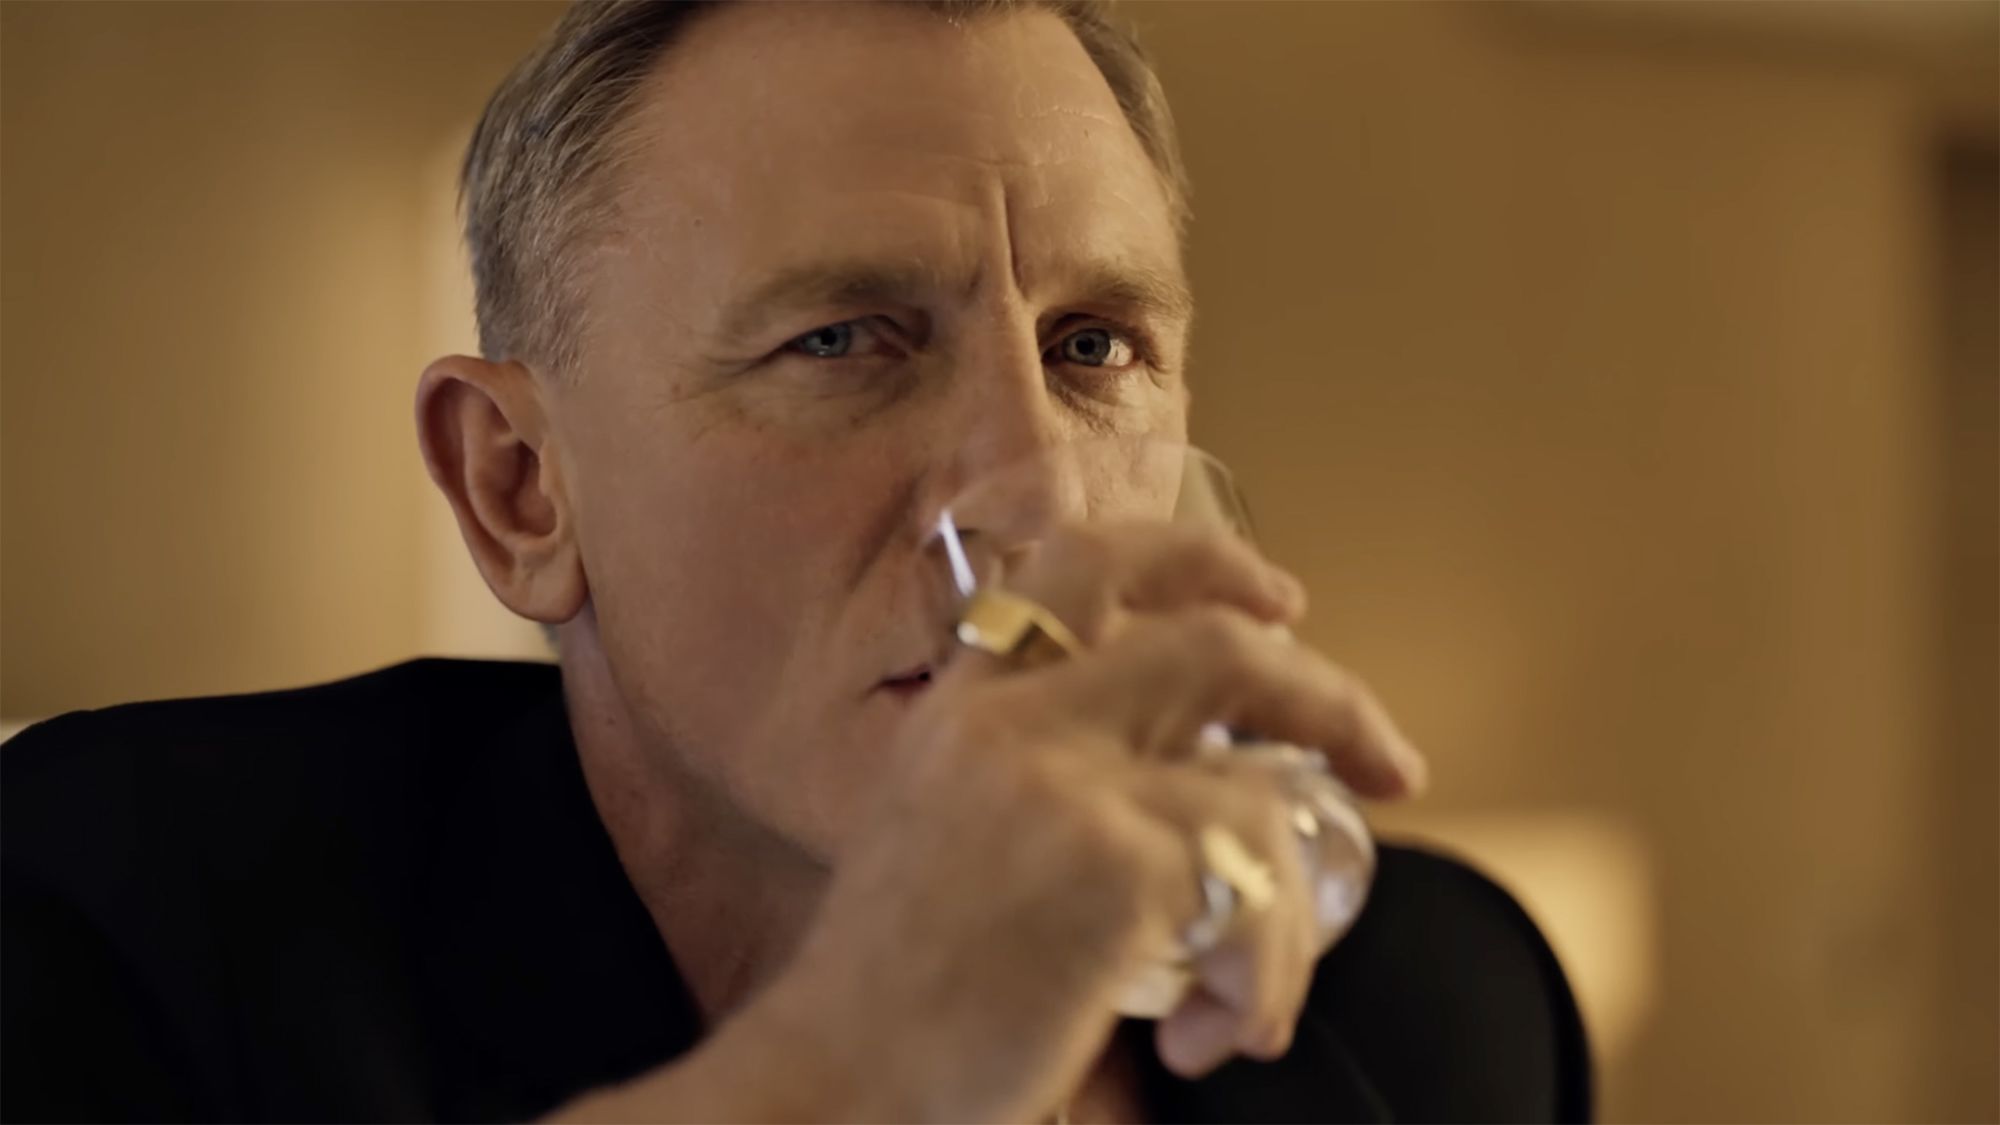 This feels like a fever dream: Daniel Craig's Belvedere Vodka dancing  commercial leaves fans in awe